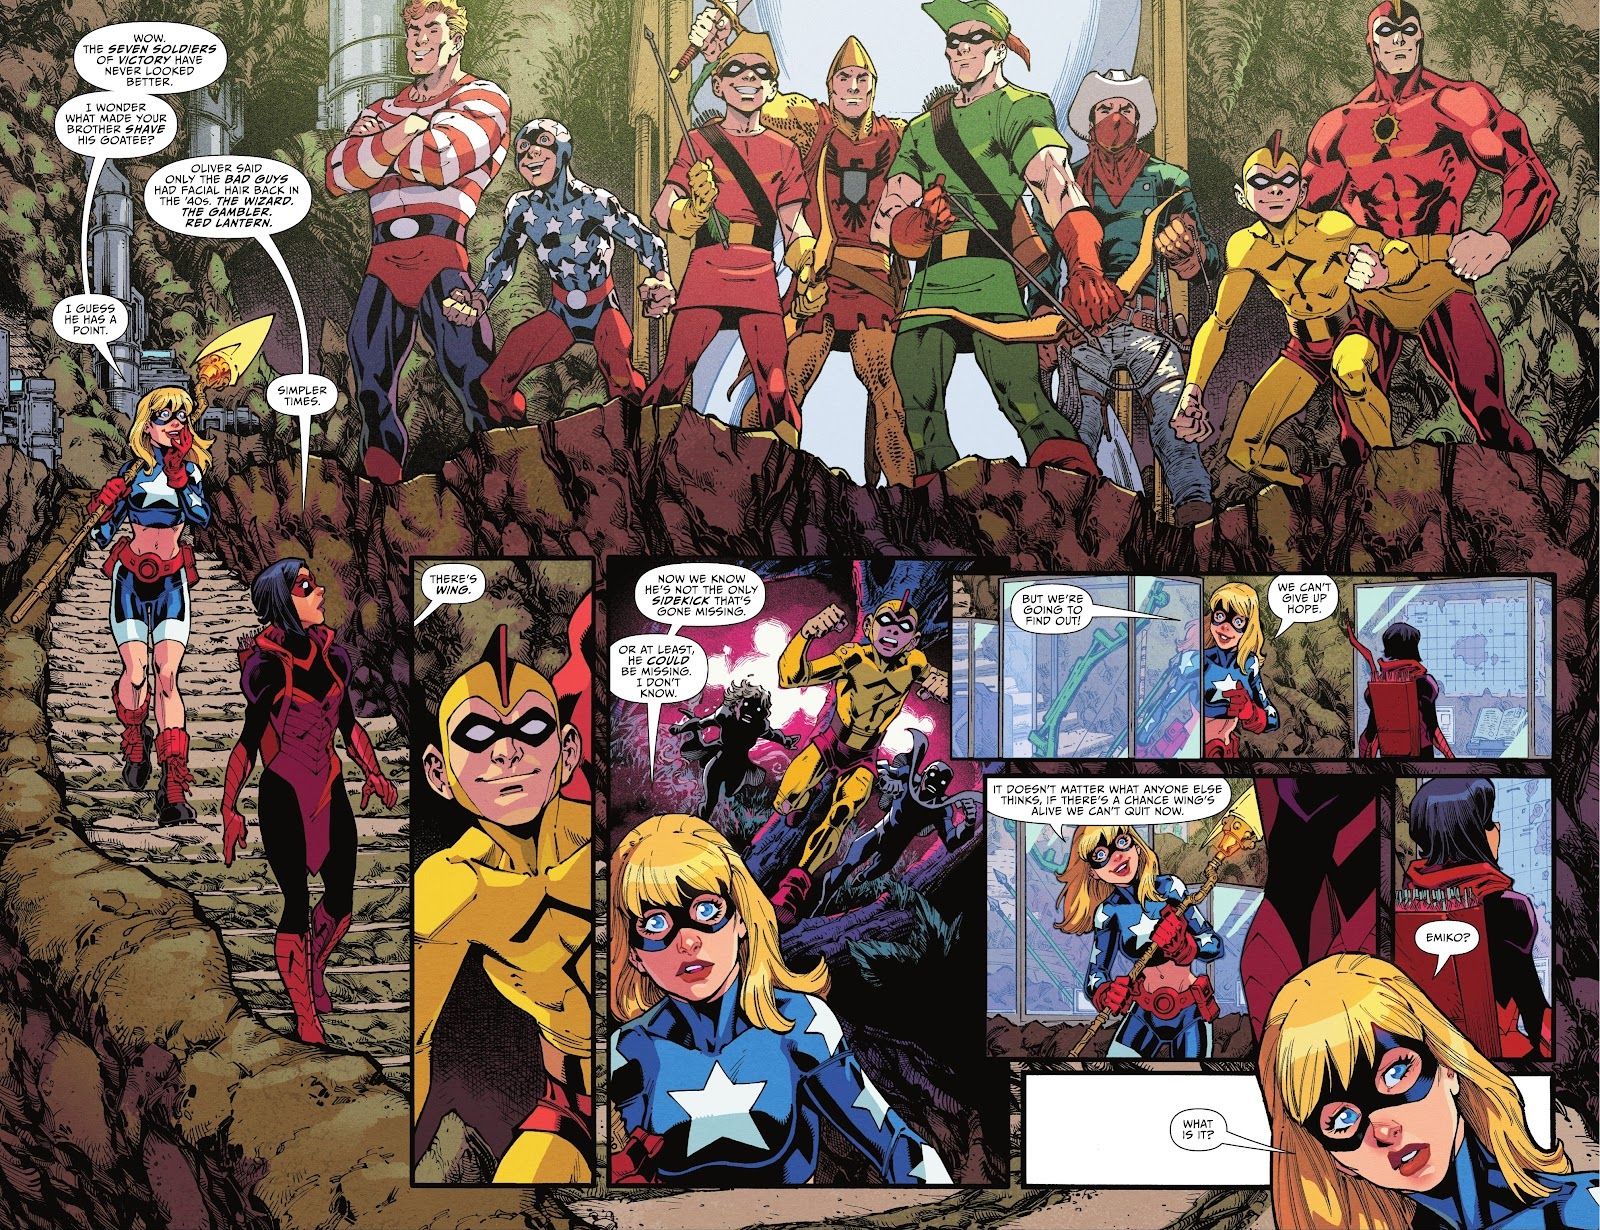 Stargirl The Lost Children #2: Green Arrow's thoughts on Facial Hair